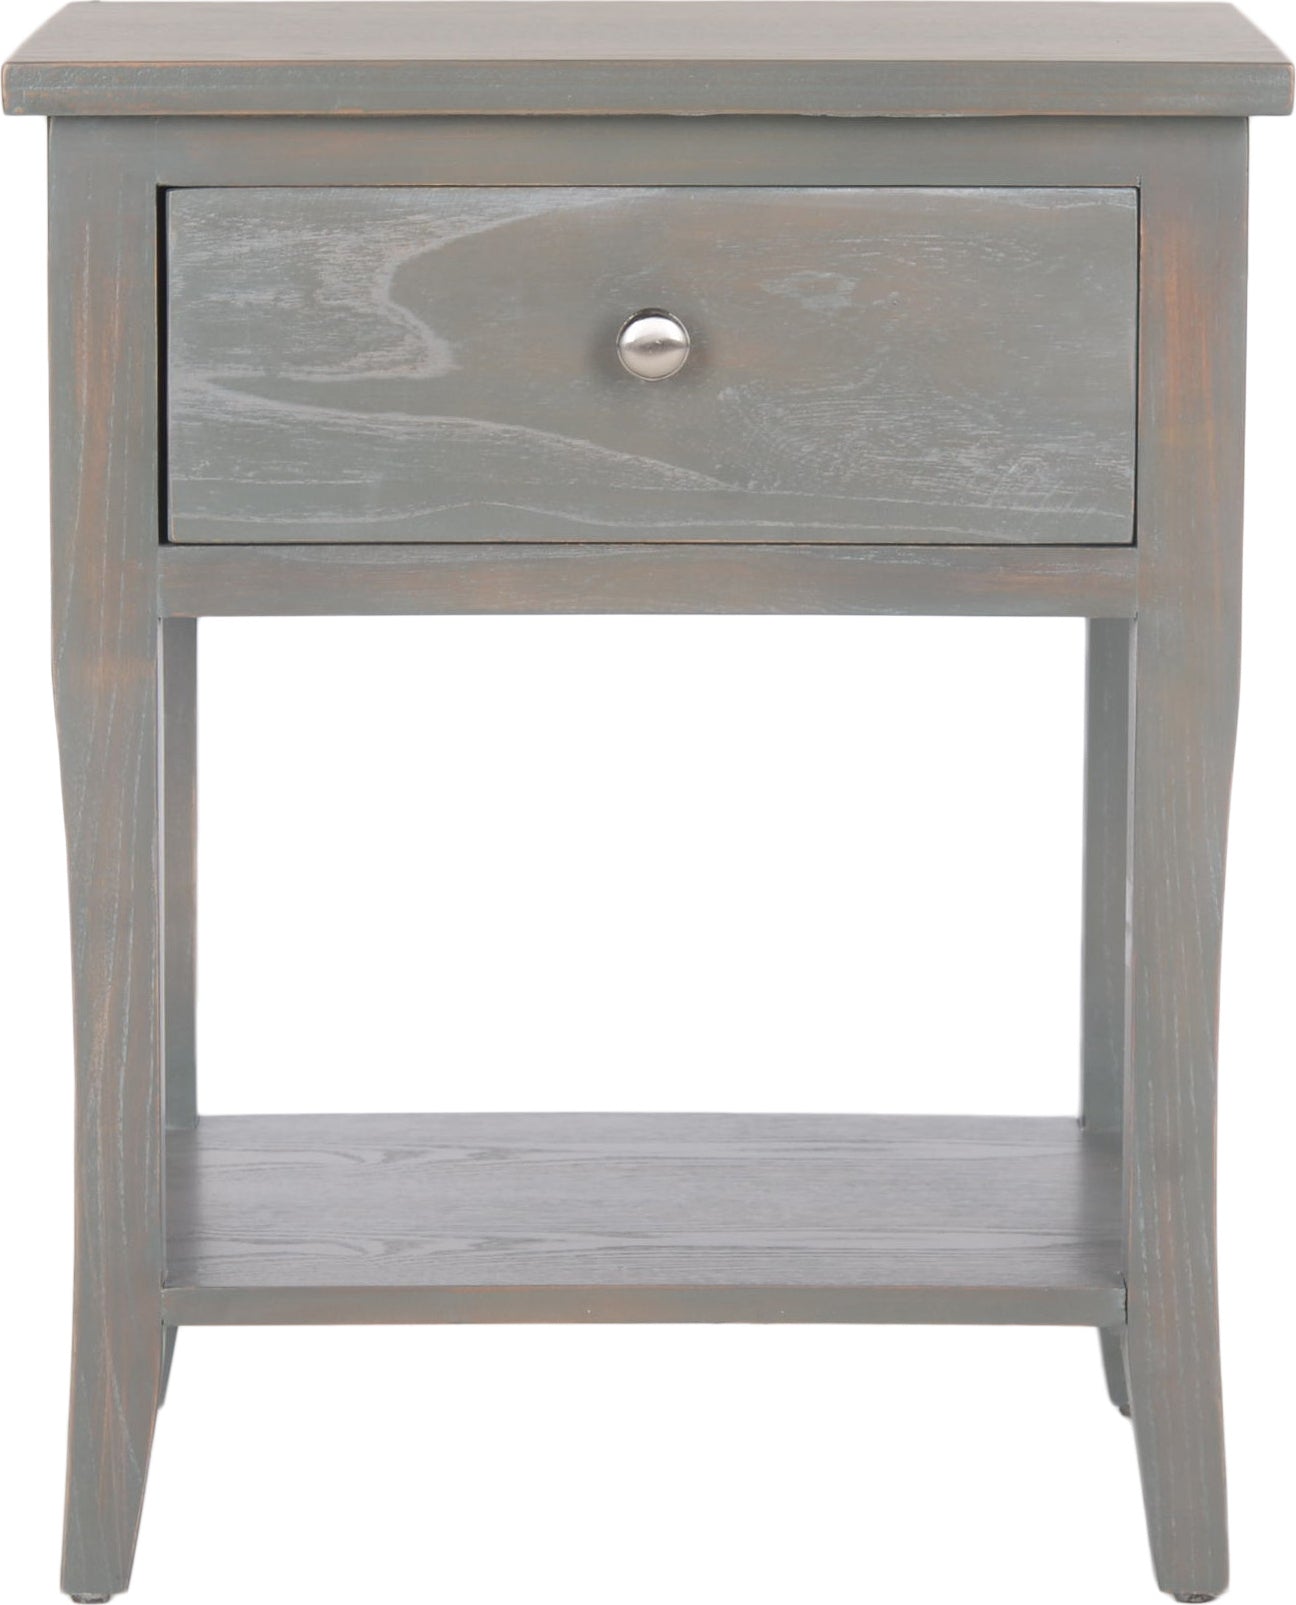 Safavieh Coby End Table With Storage Drawer French Grey Furniture main image